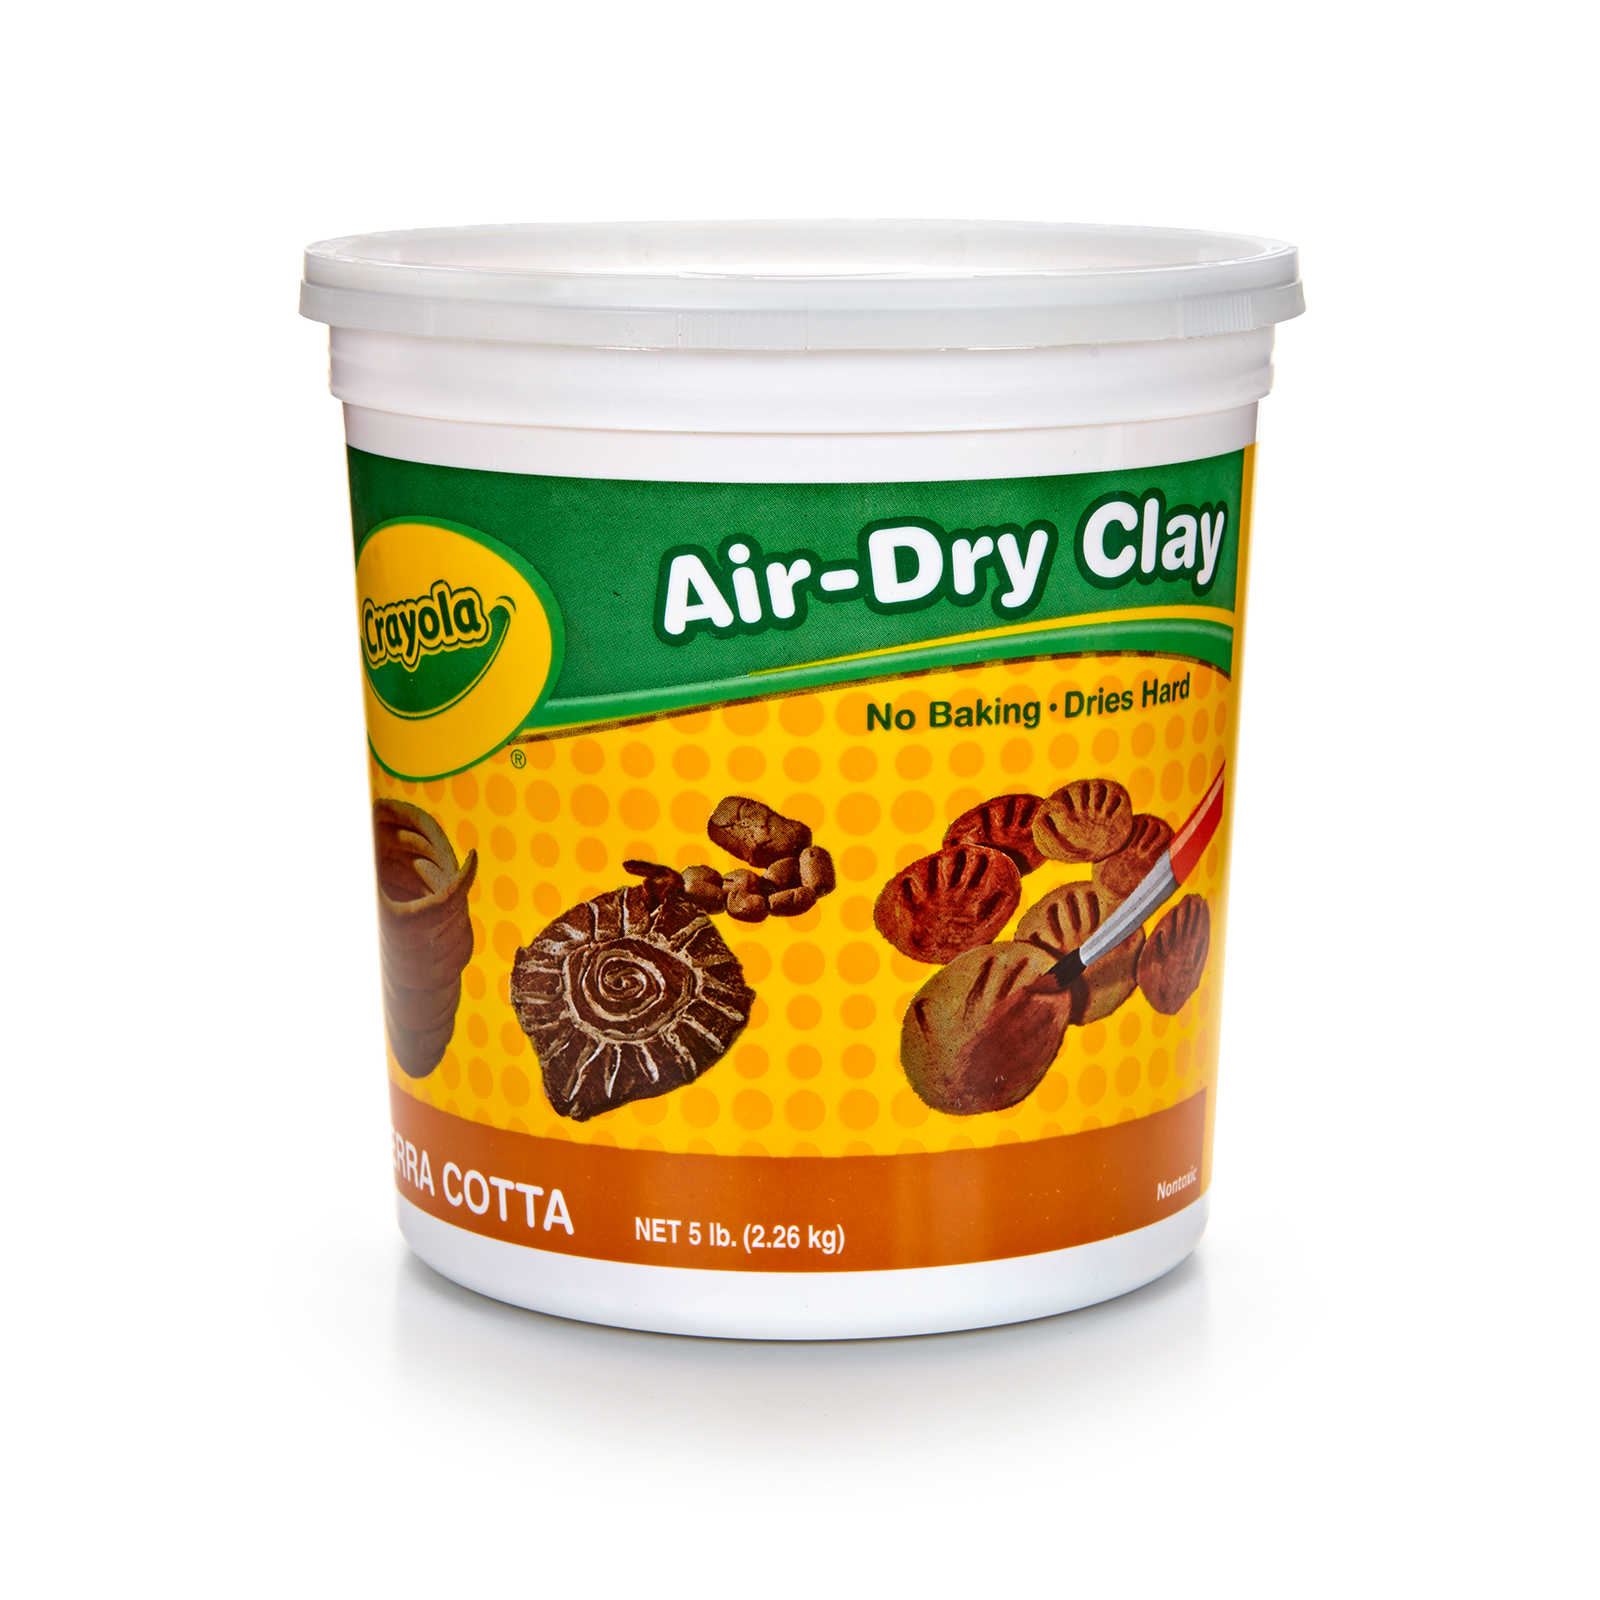 Shop for the Crayola® Terra Cotta Air-Dry Clay at Michaels